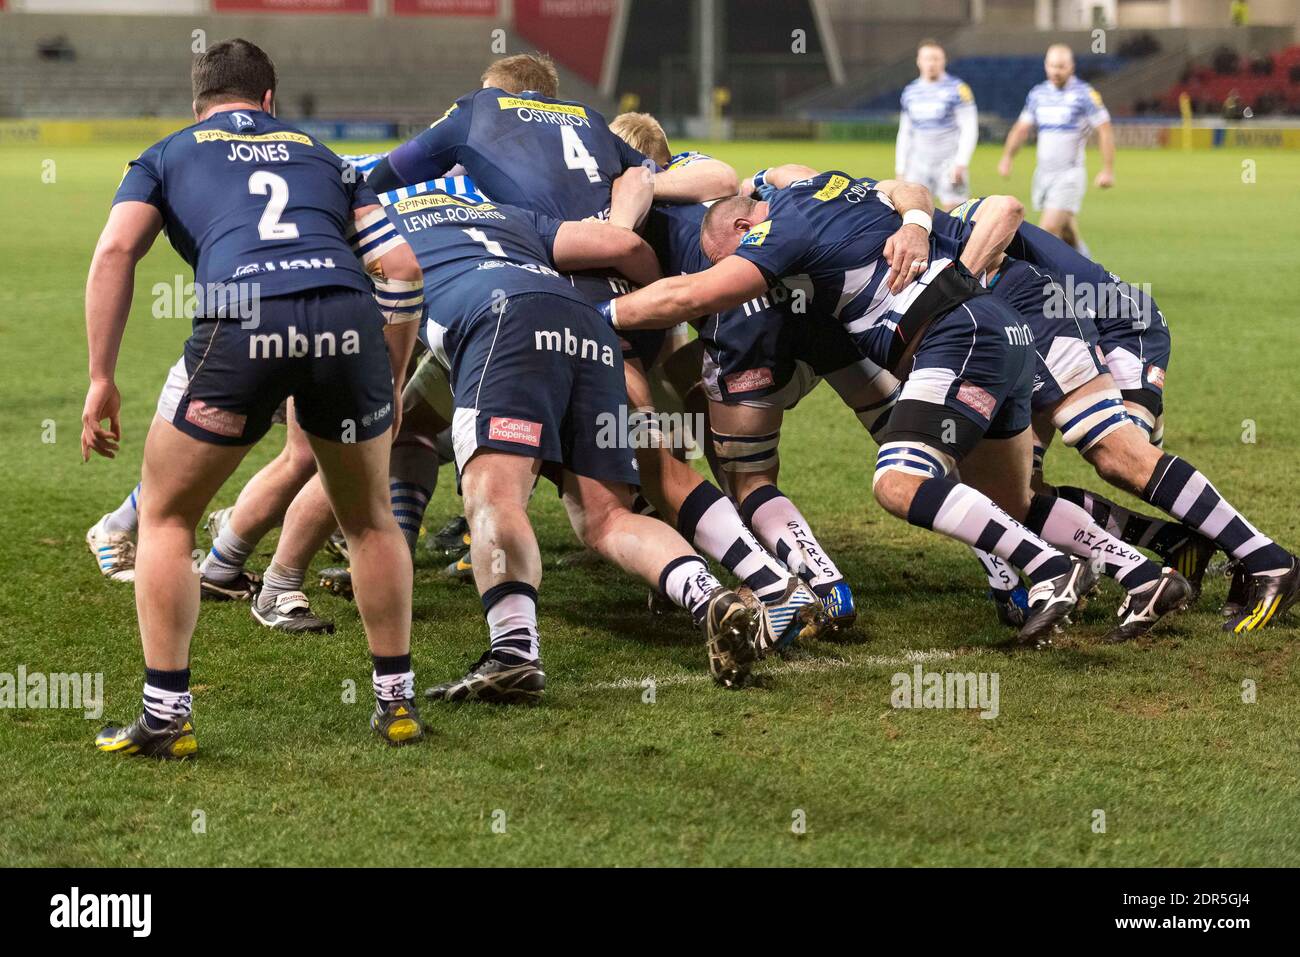 Typical rugby union scrumdown. Stock Photo